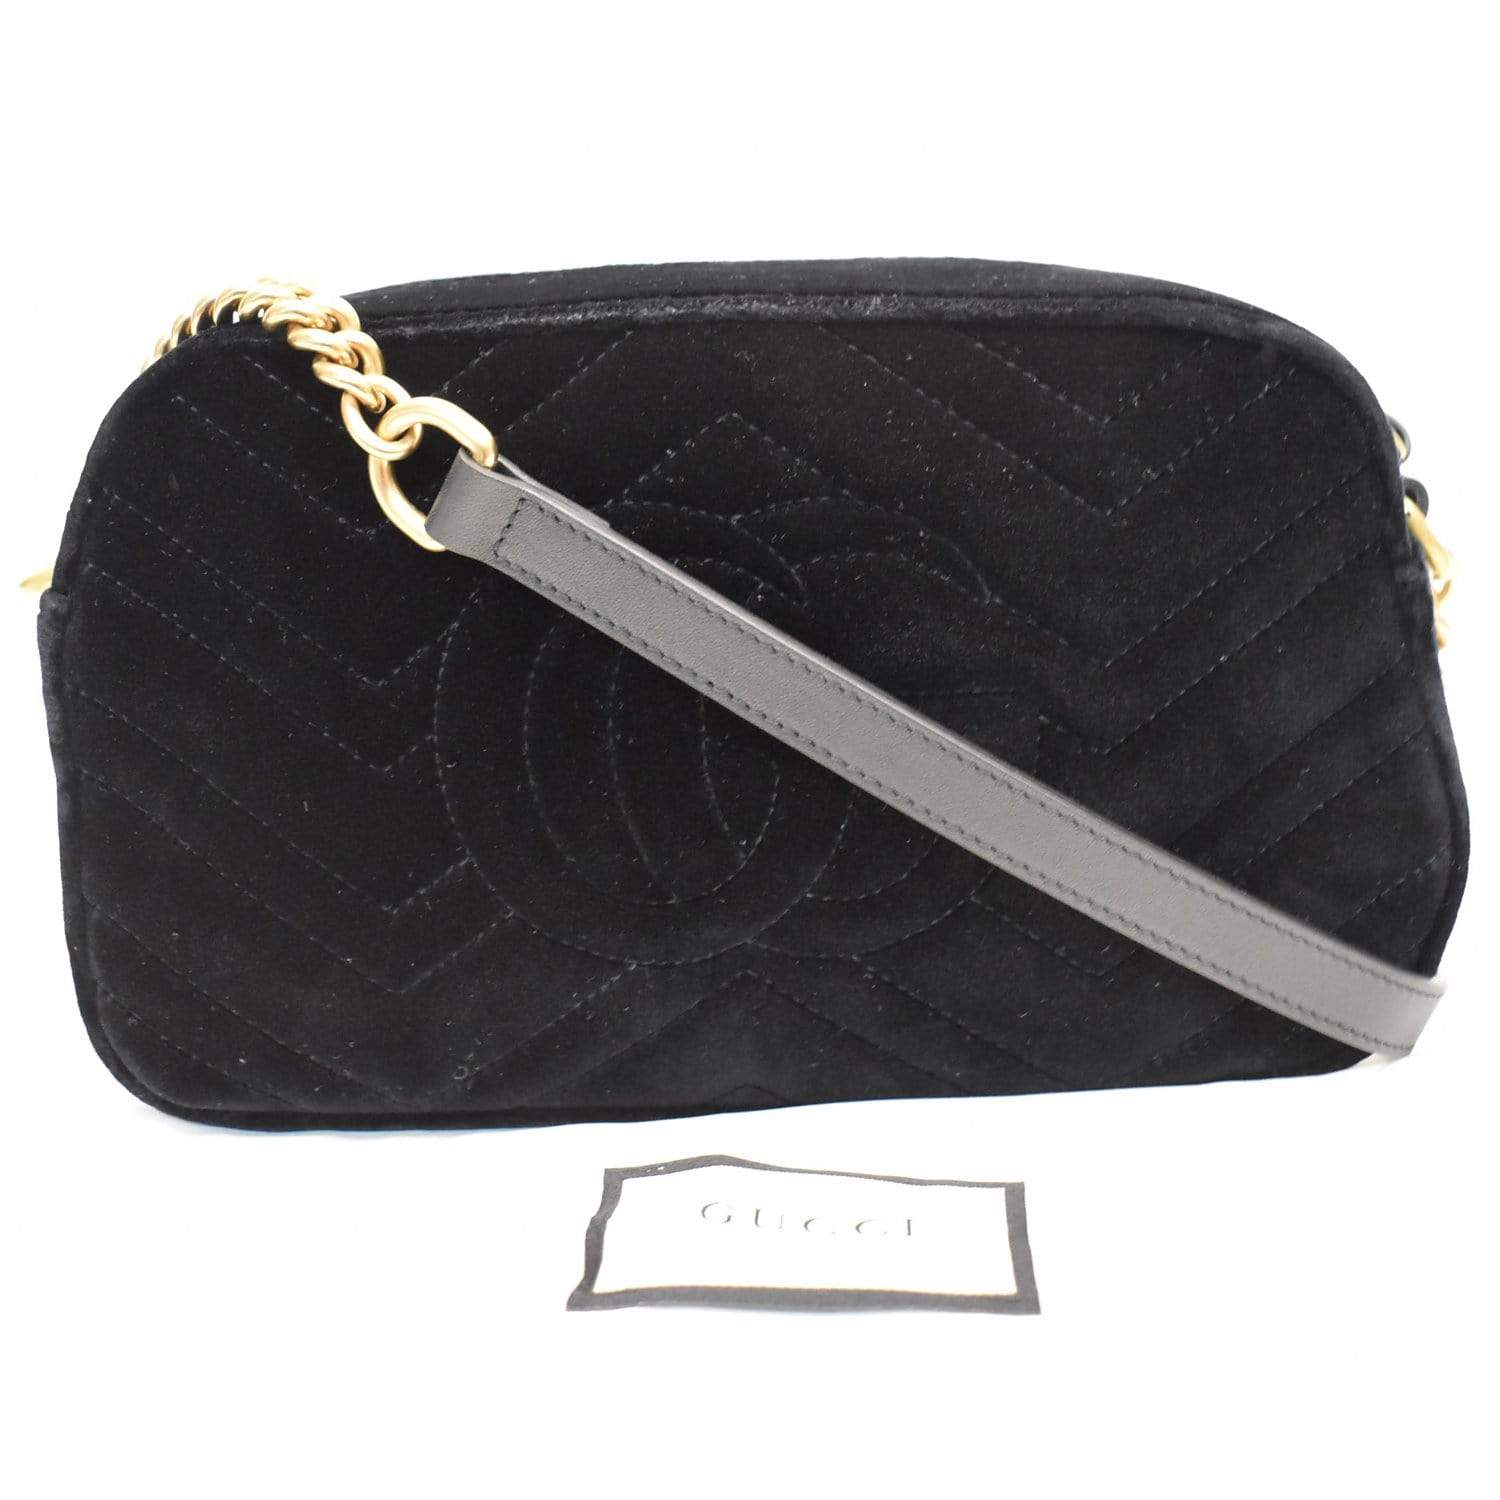 Shop GUCCI GG Marmont GG Marmont small shoulder bag (447632 DTD1T 9022) by  Eretico